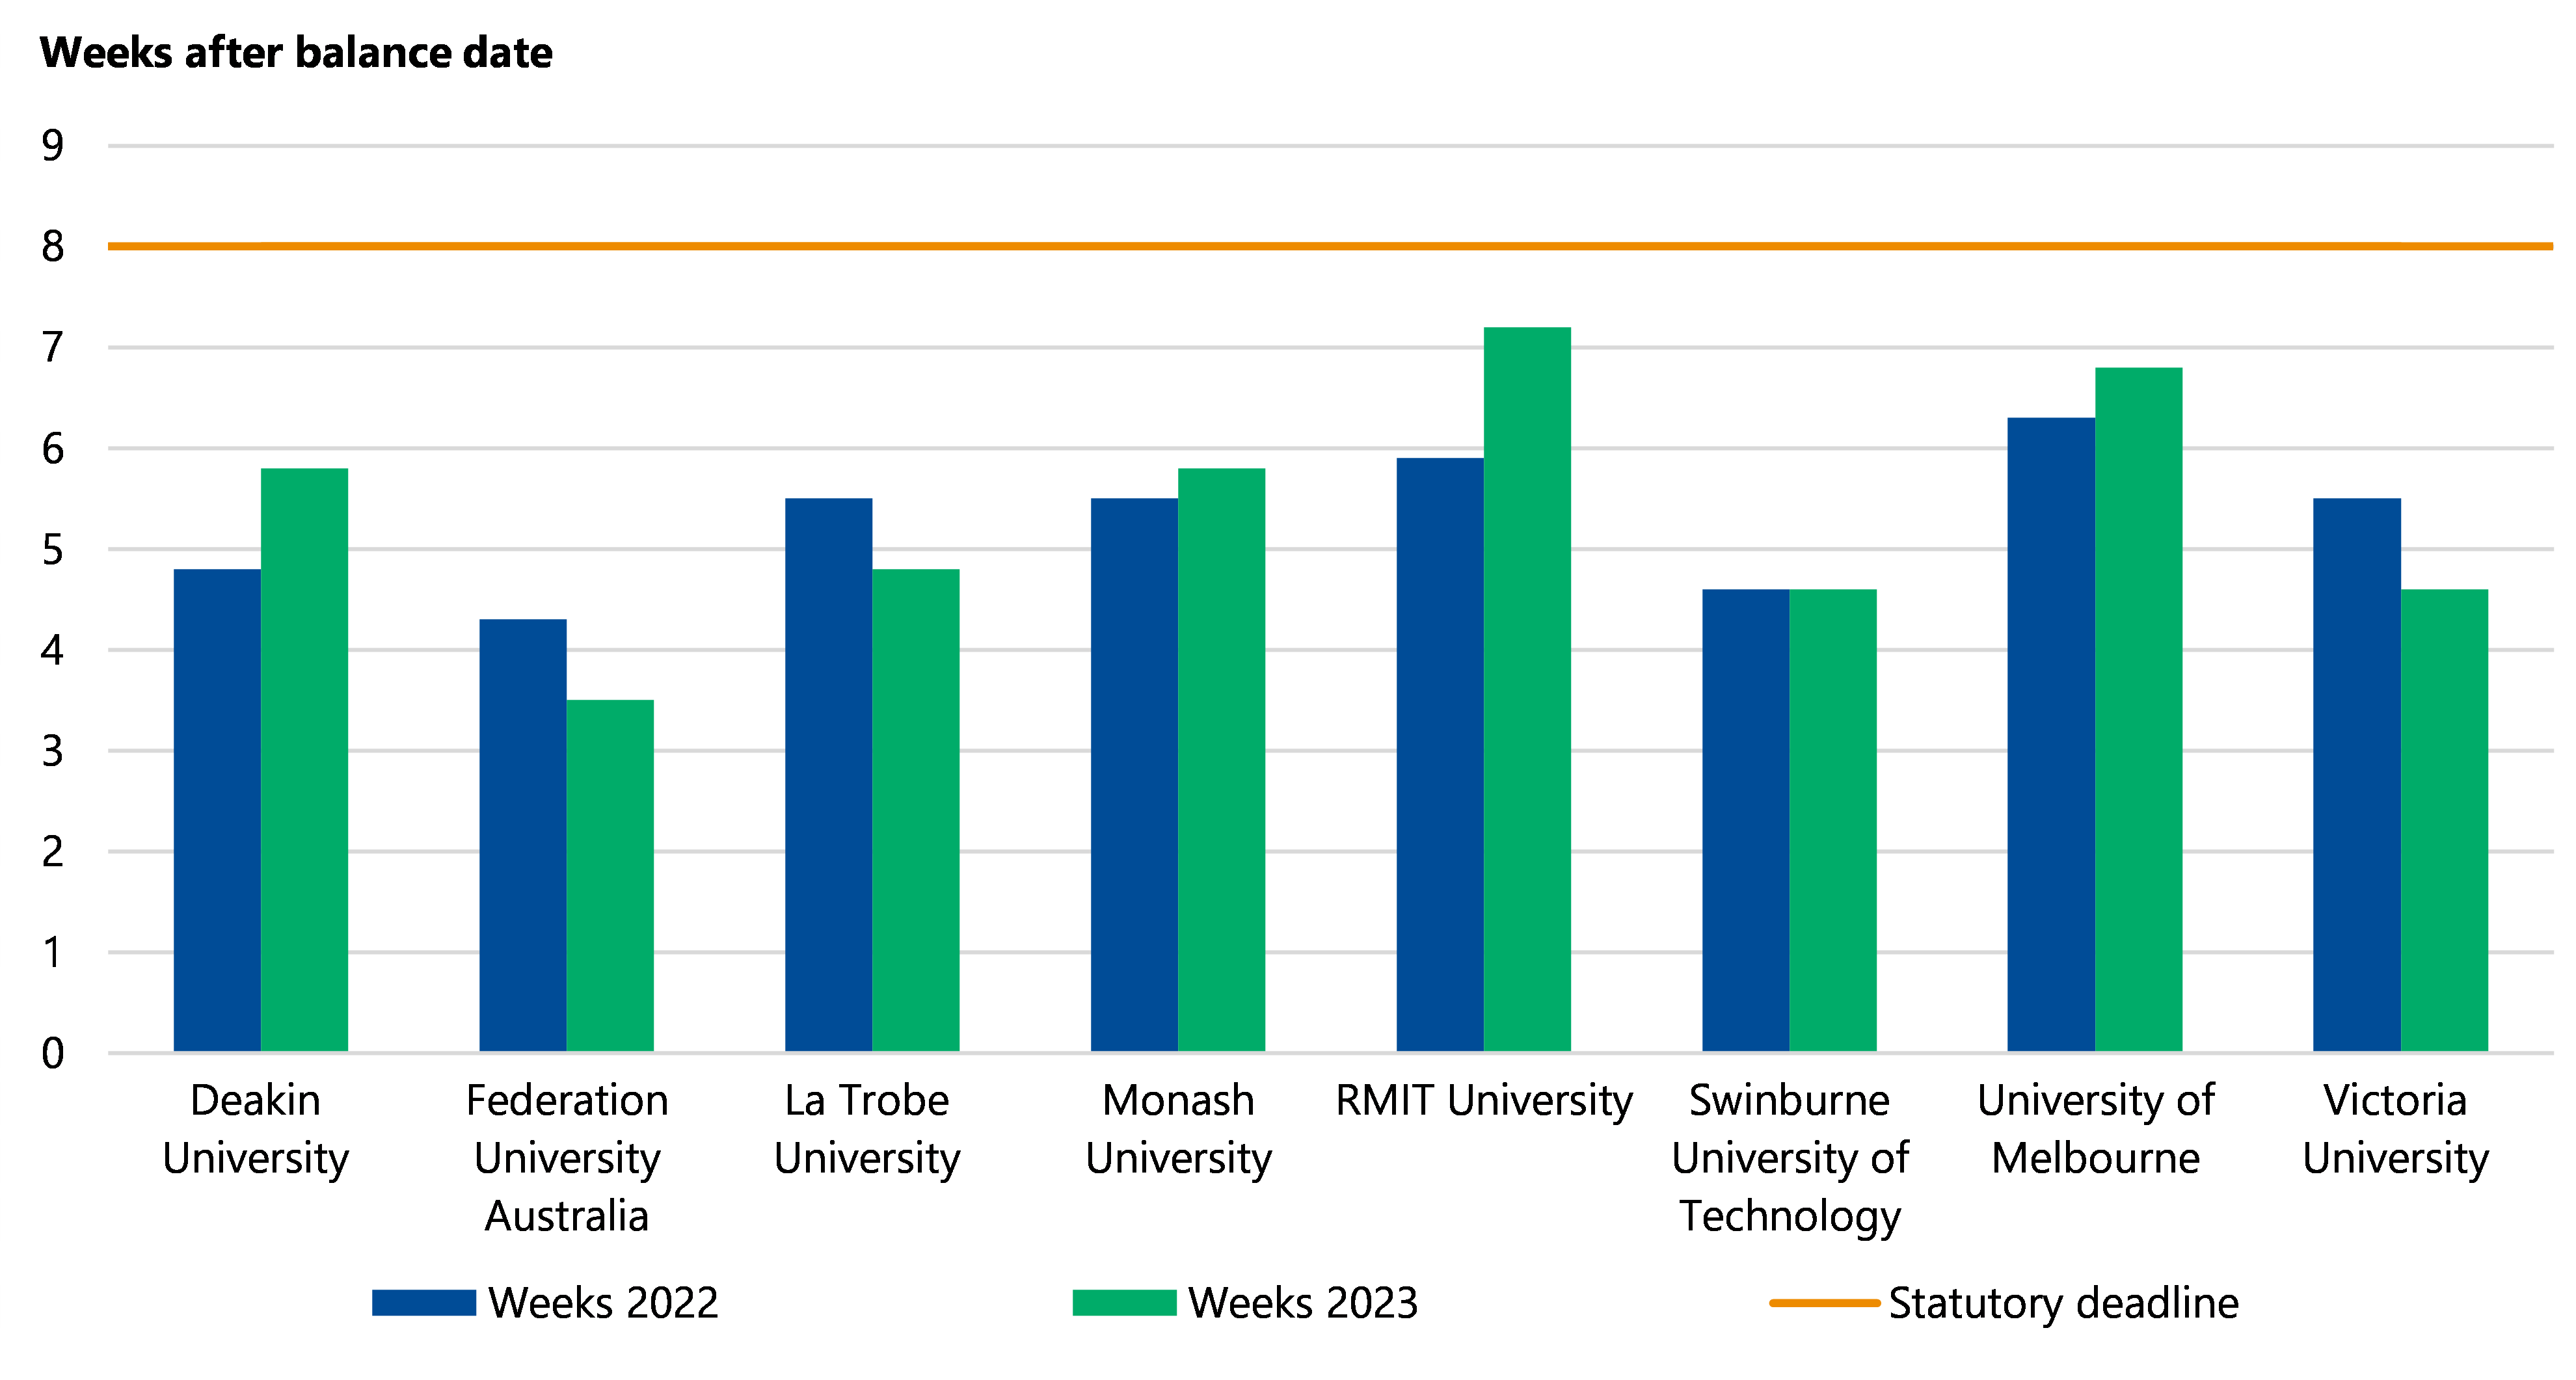 Figure 2 is a clustered bar chart. It shows that all universities gave us their draft financial reports within the 8-week statutory deadline in 2022 and 2023.